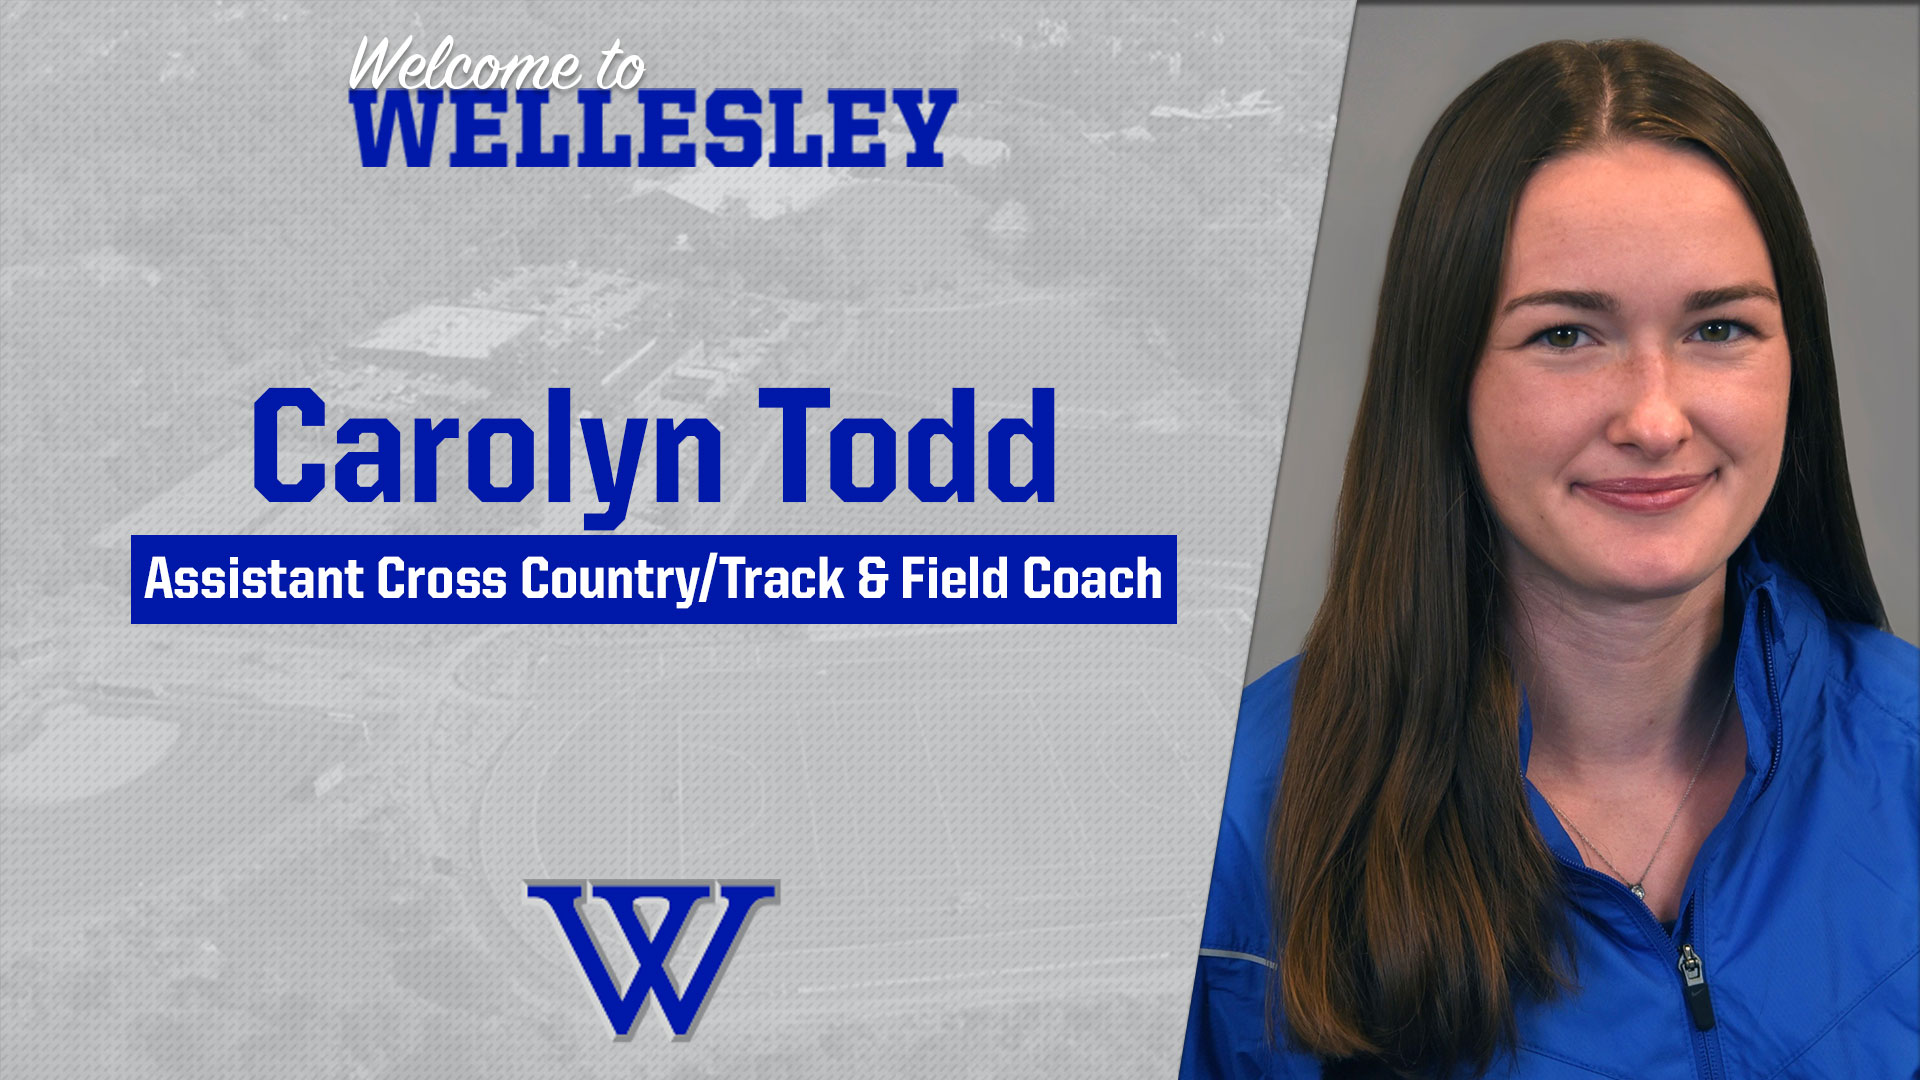 Carolyn Todd joins Wellesley cross country and track & field as an assistant coach